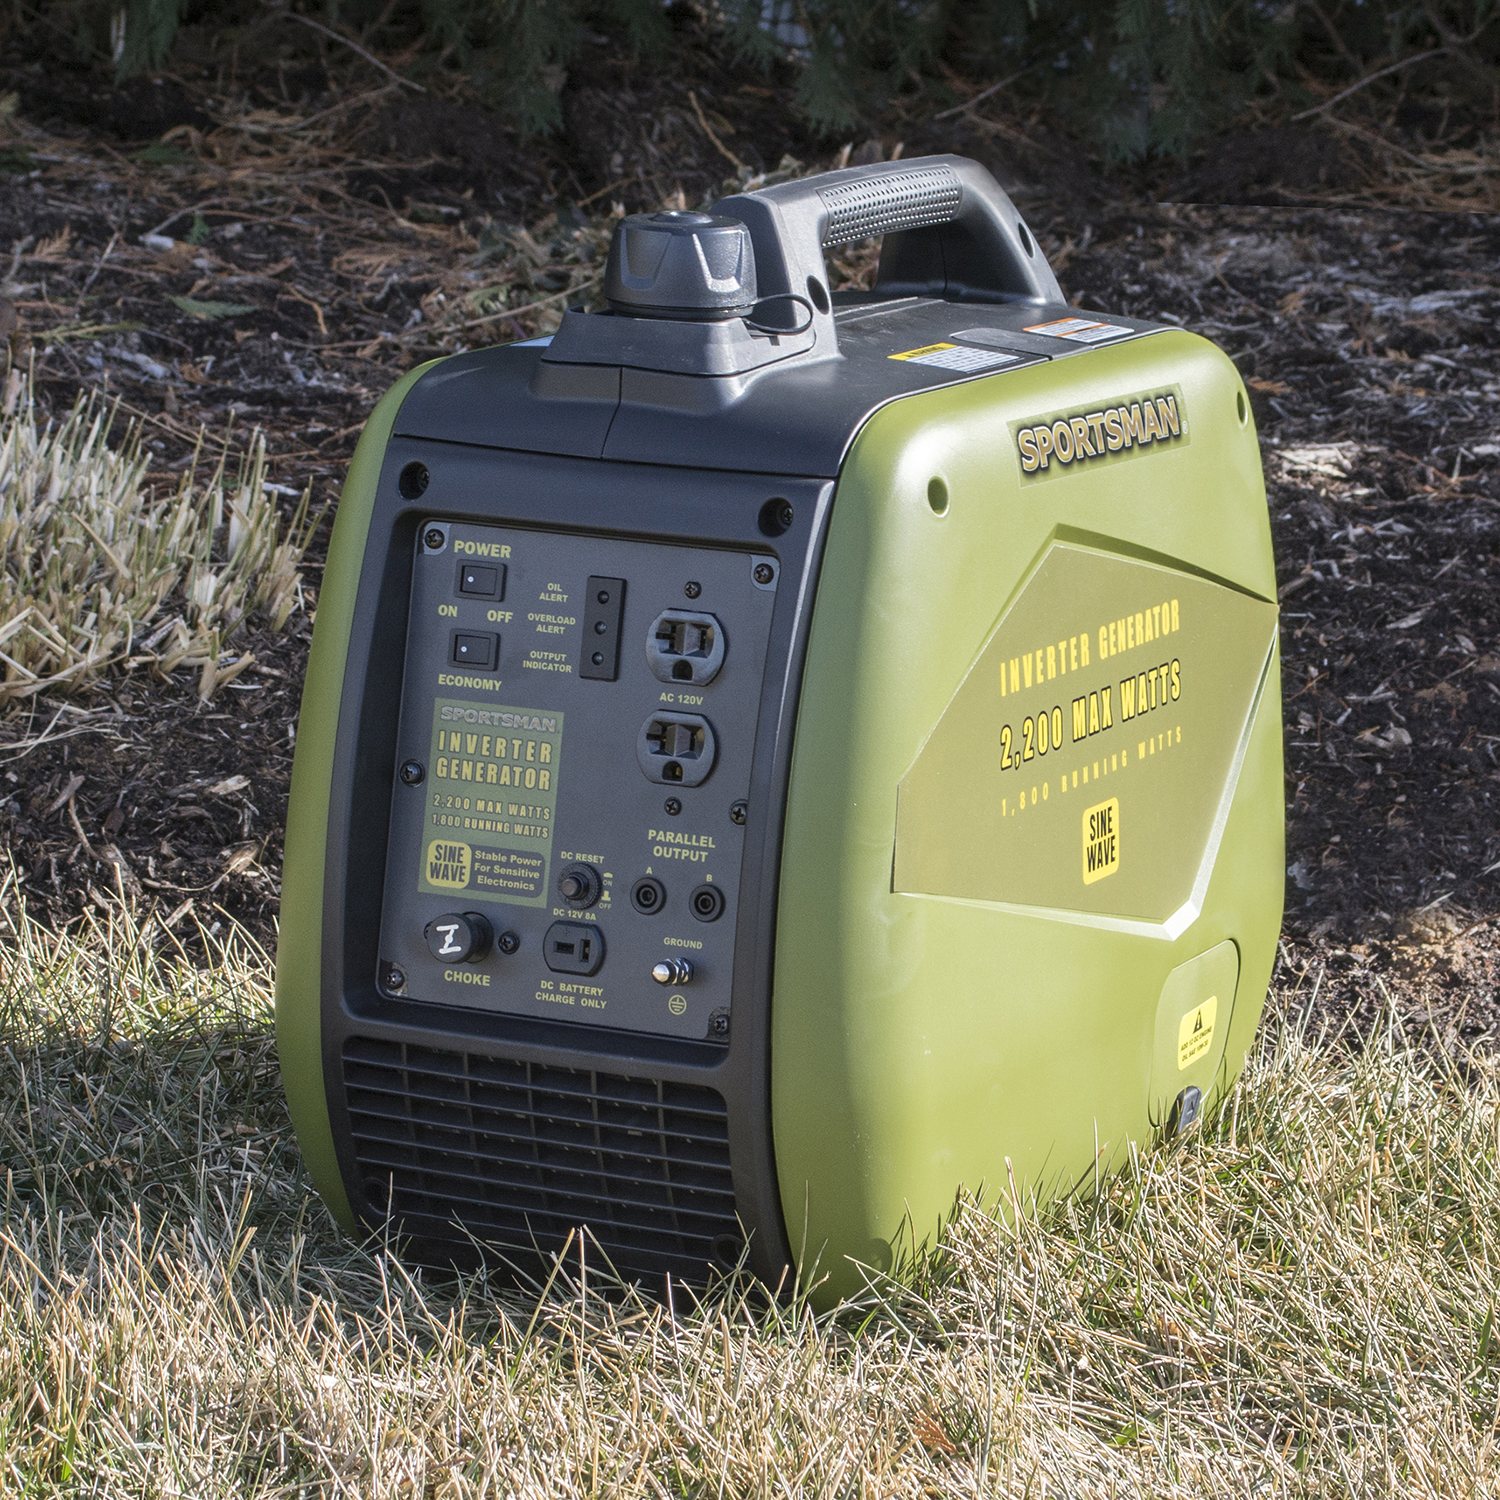 Use the gas powered GEN2000i Inverter generator for electronics